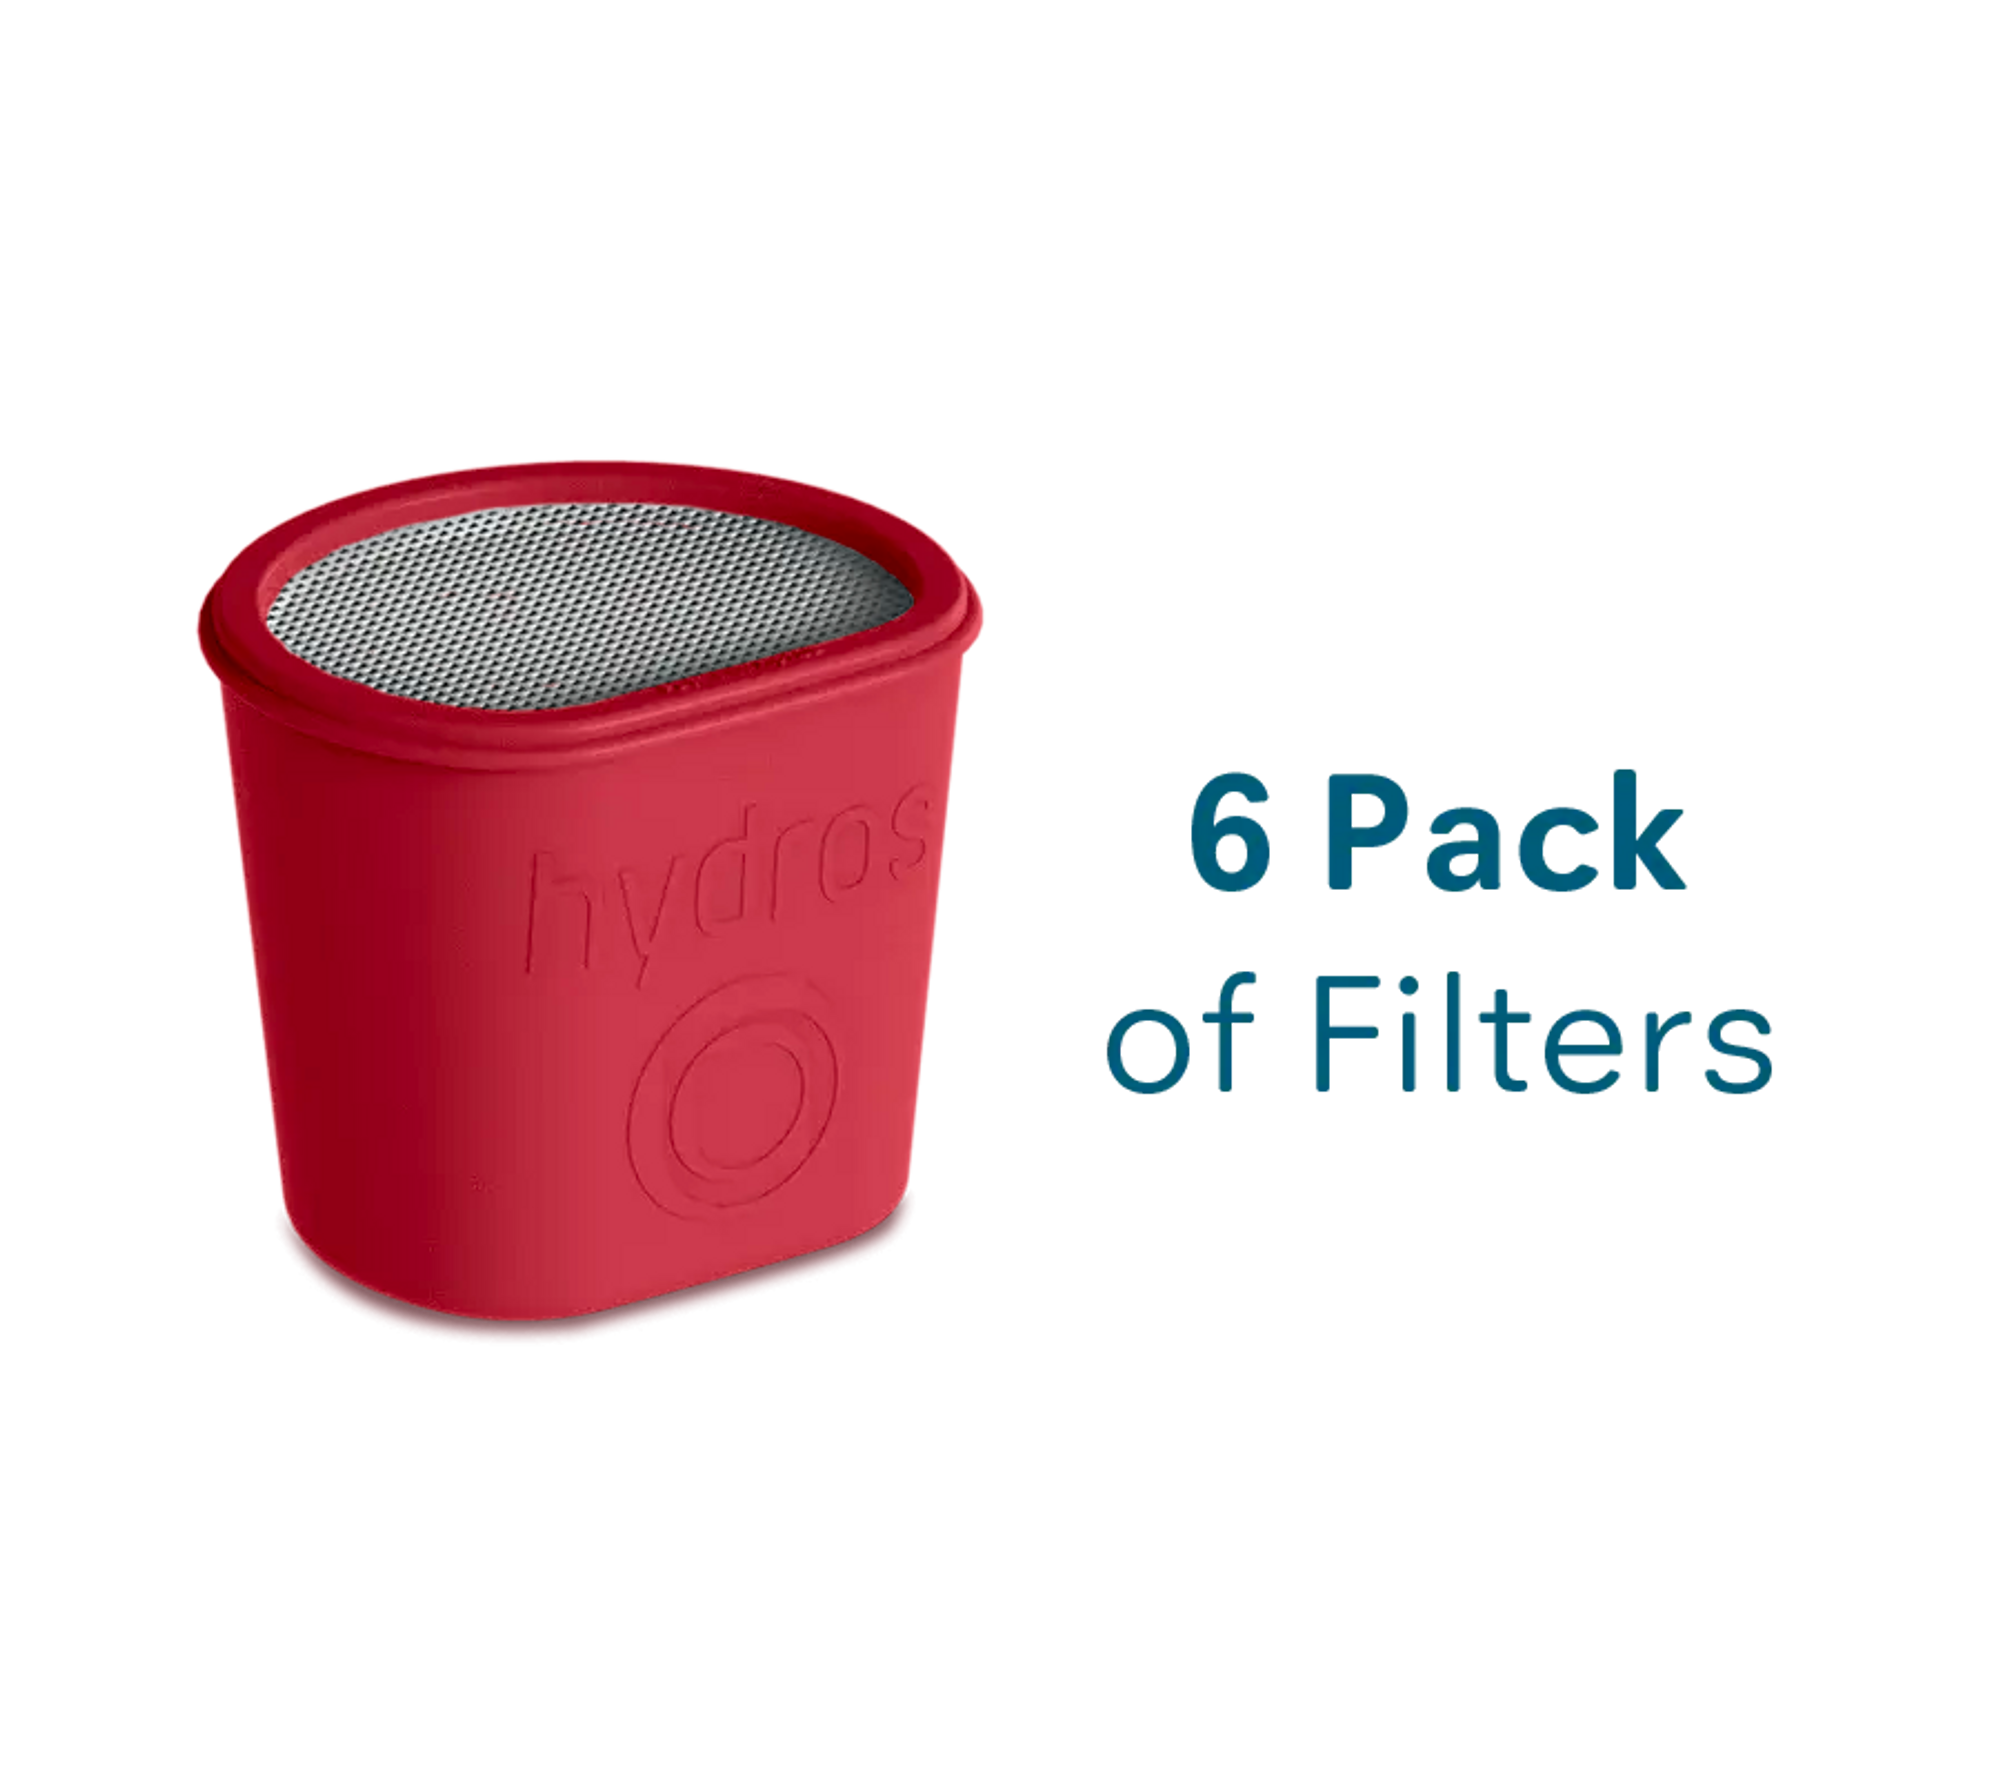 6 Pack of Color Filters